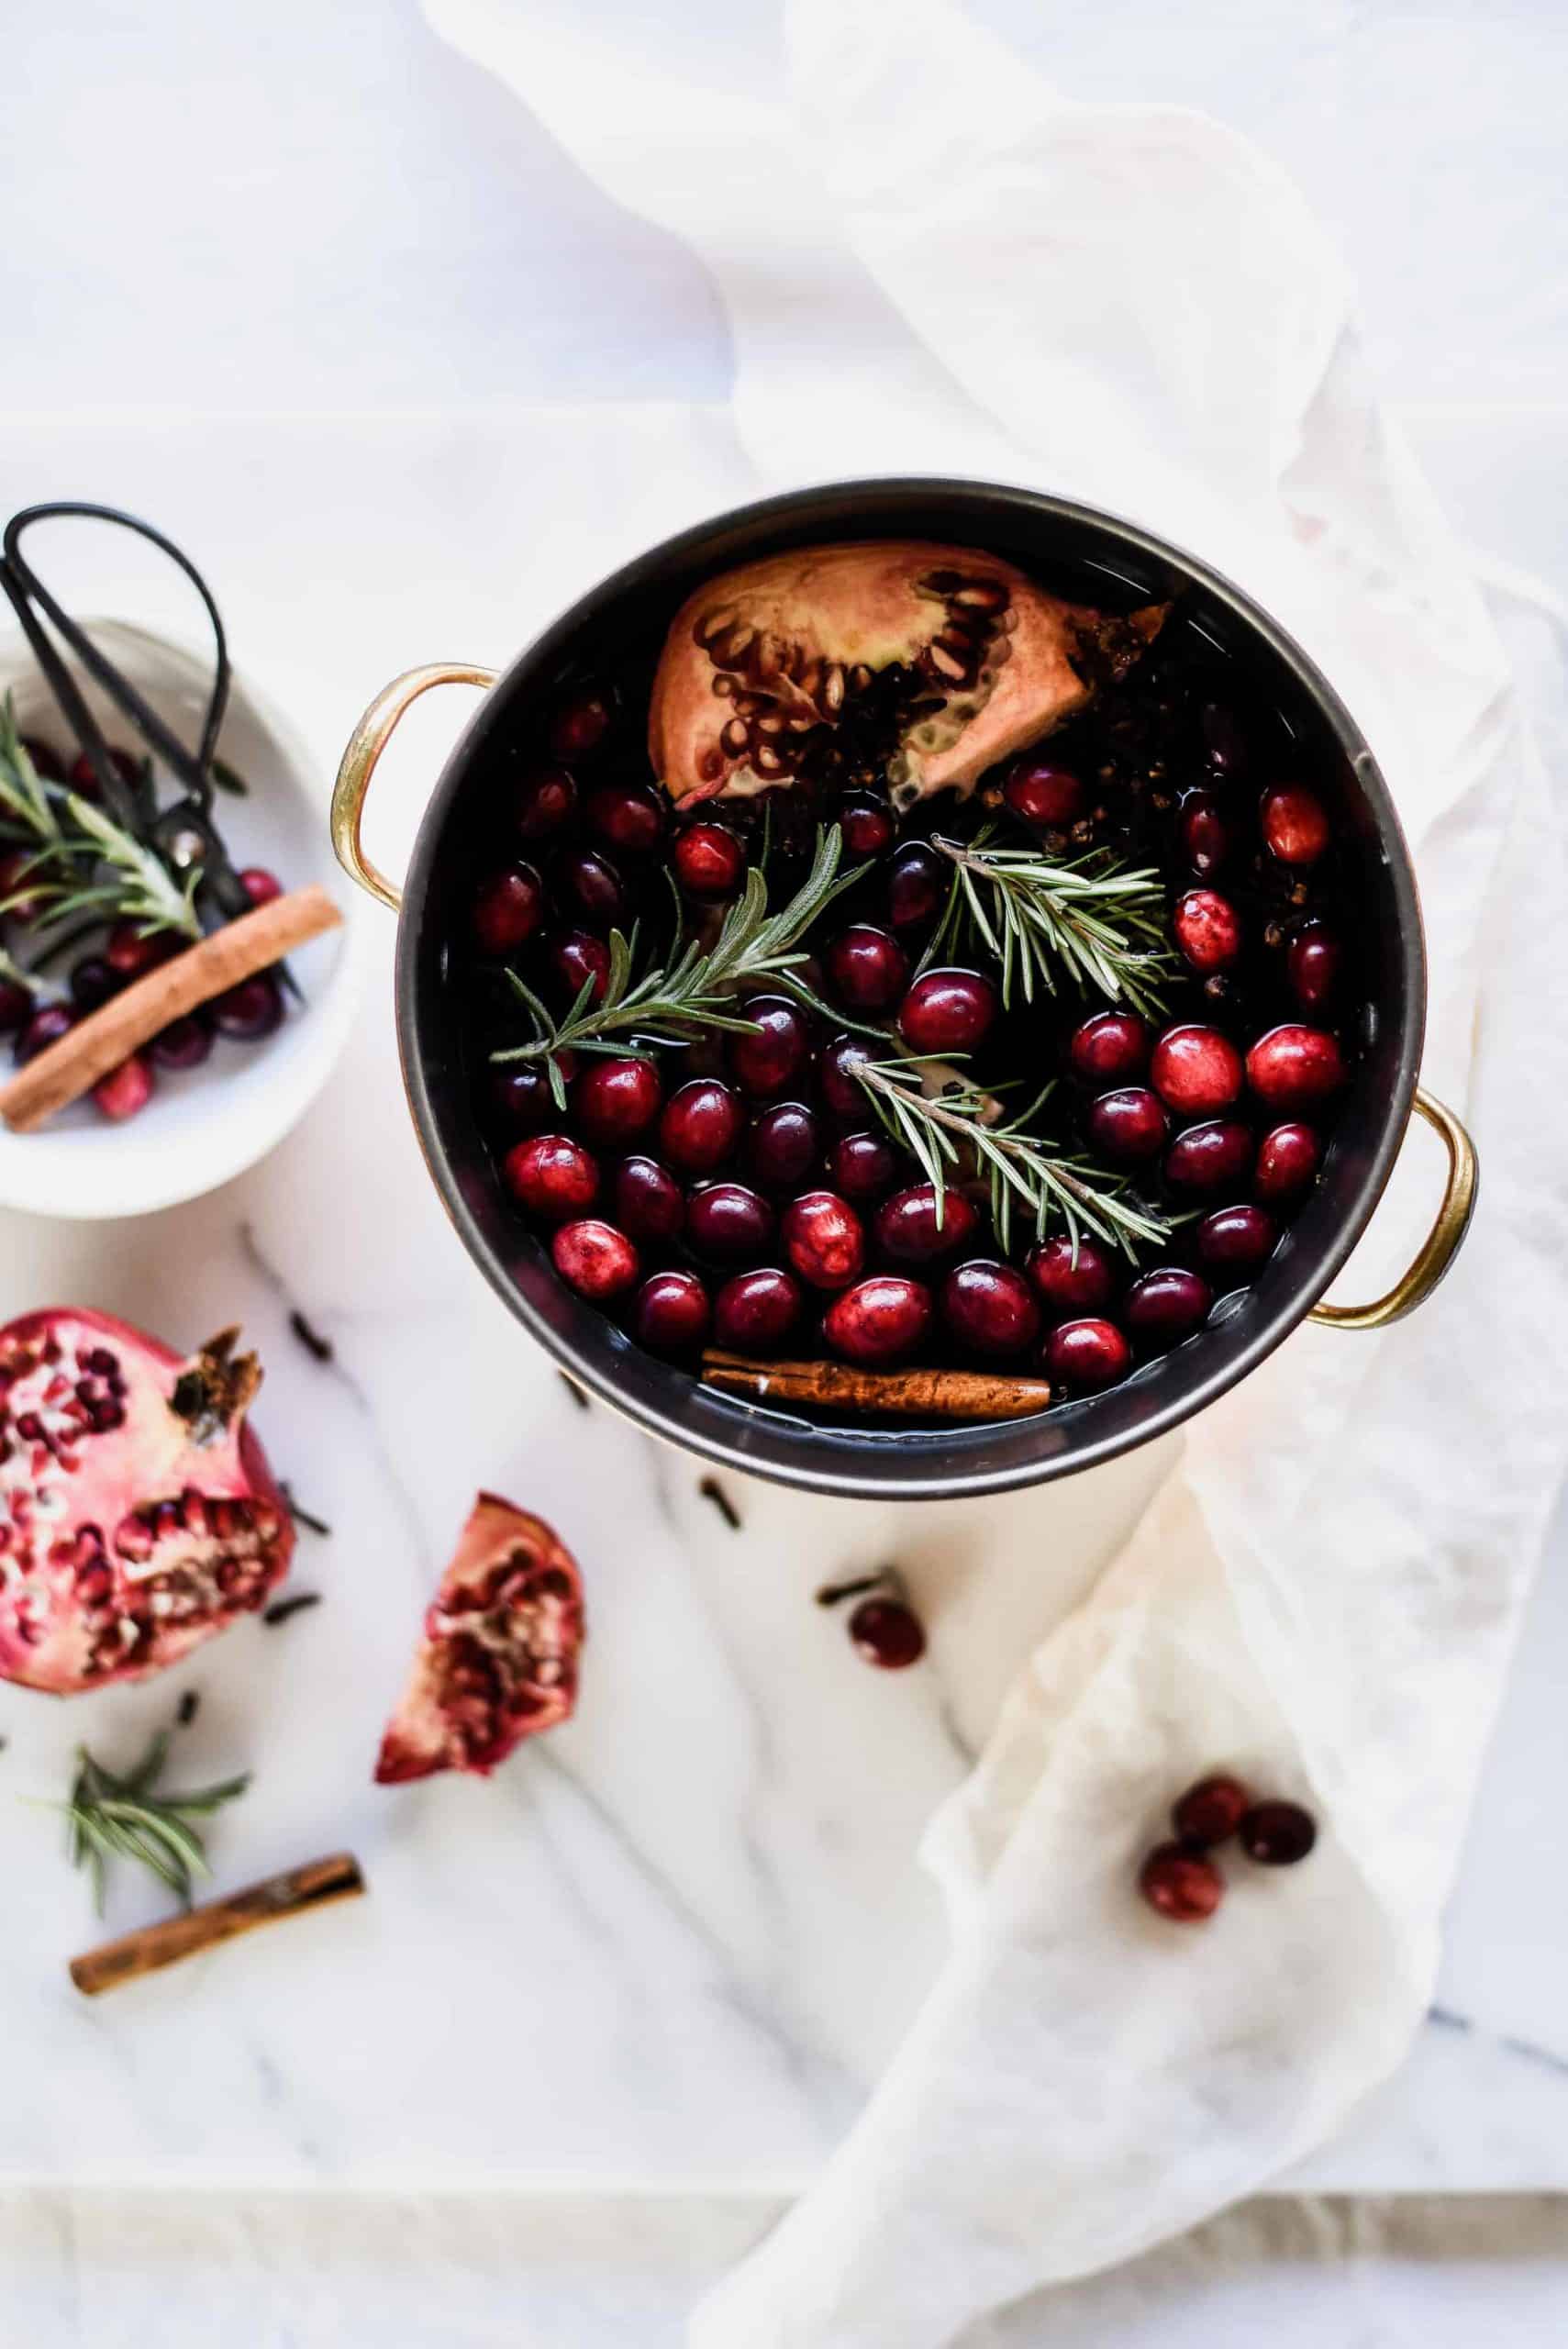 Use this easy recipe for homemade stove top potpourri to make your whole house smell like Christmas all year long!